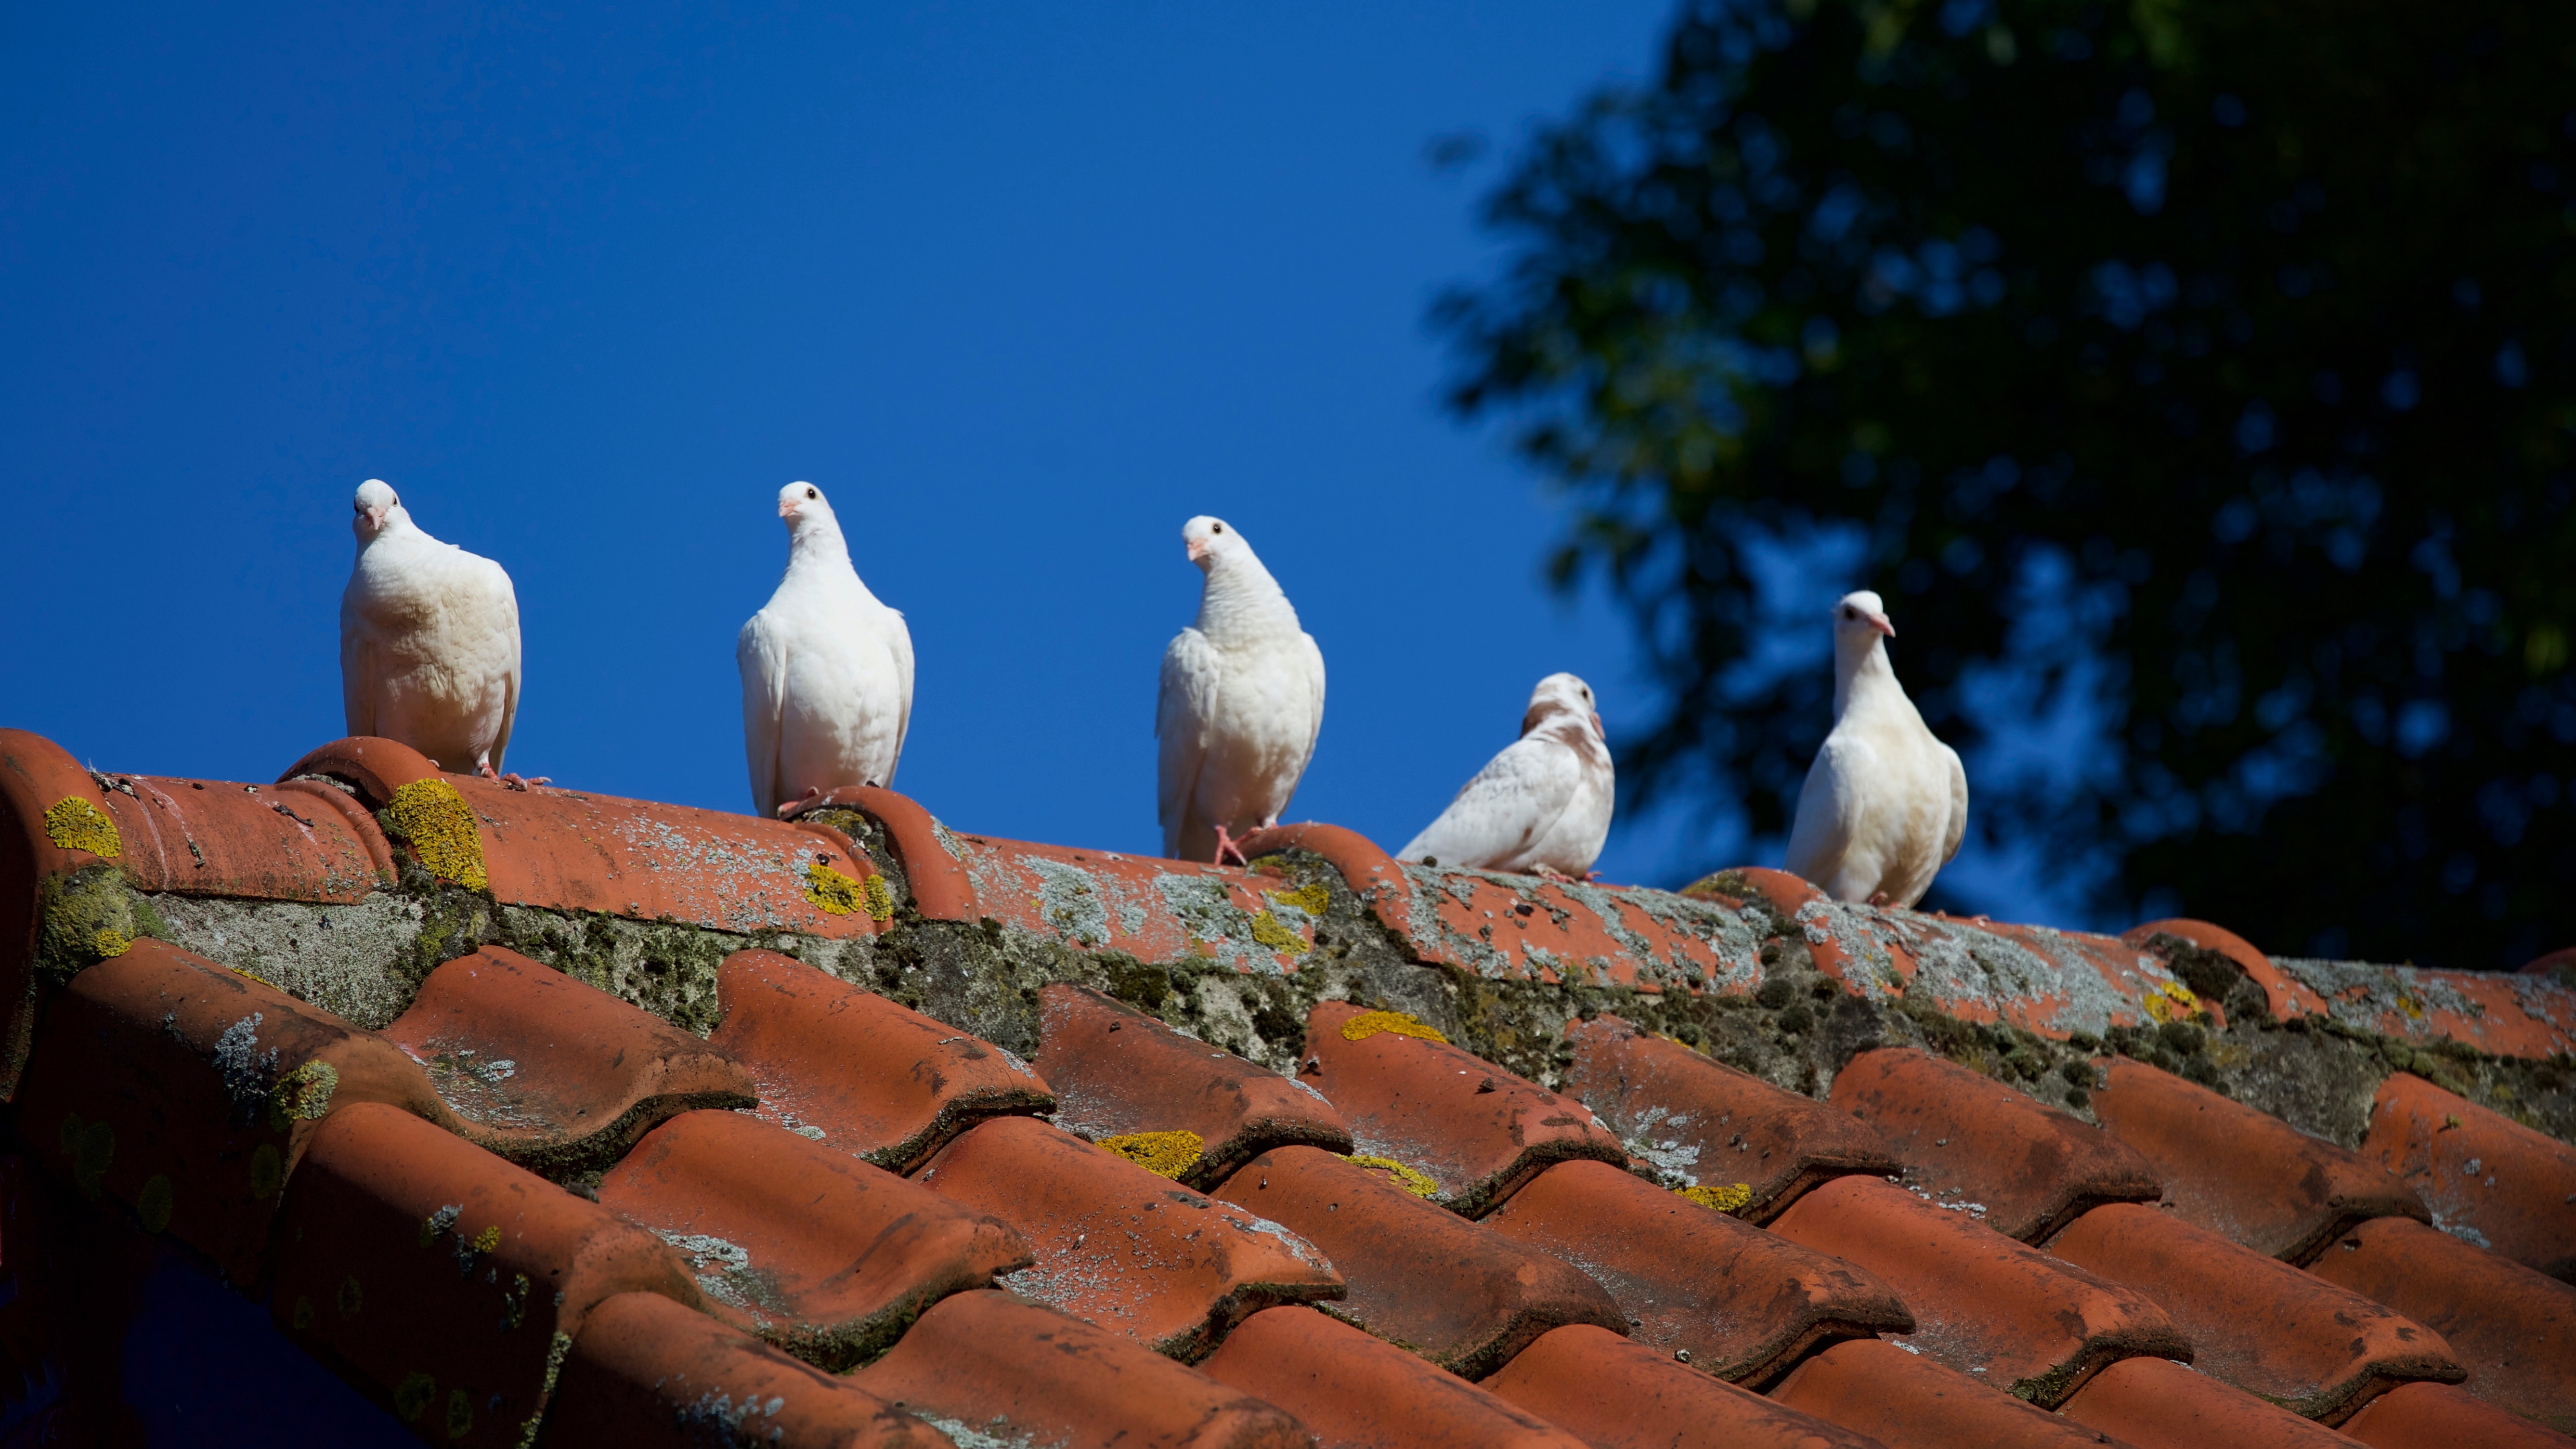 white pigeons sitting on top of ceramic shingle roof